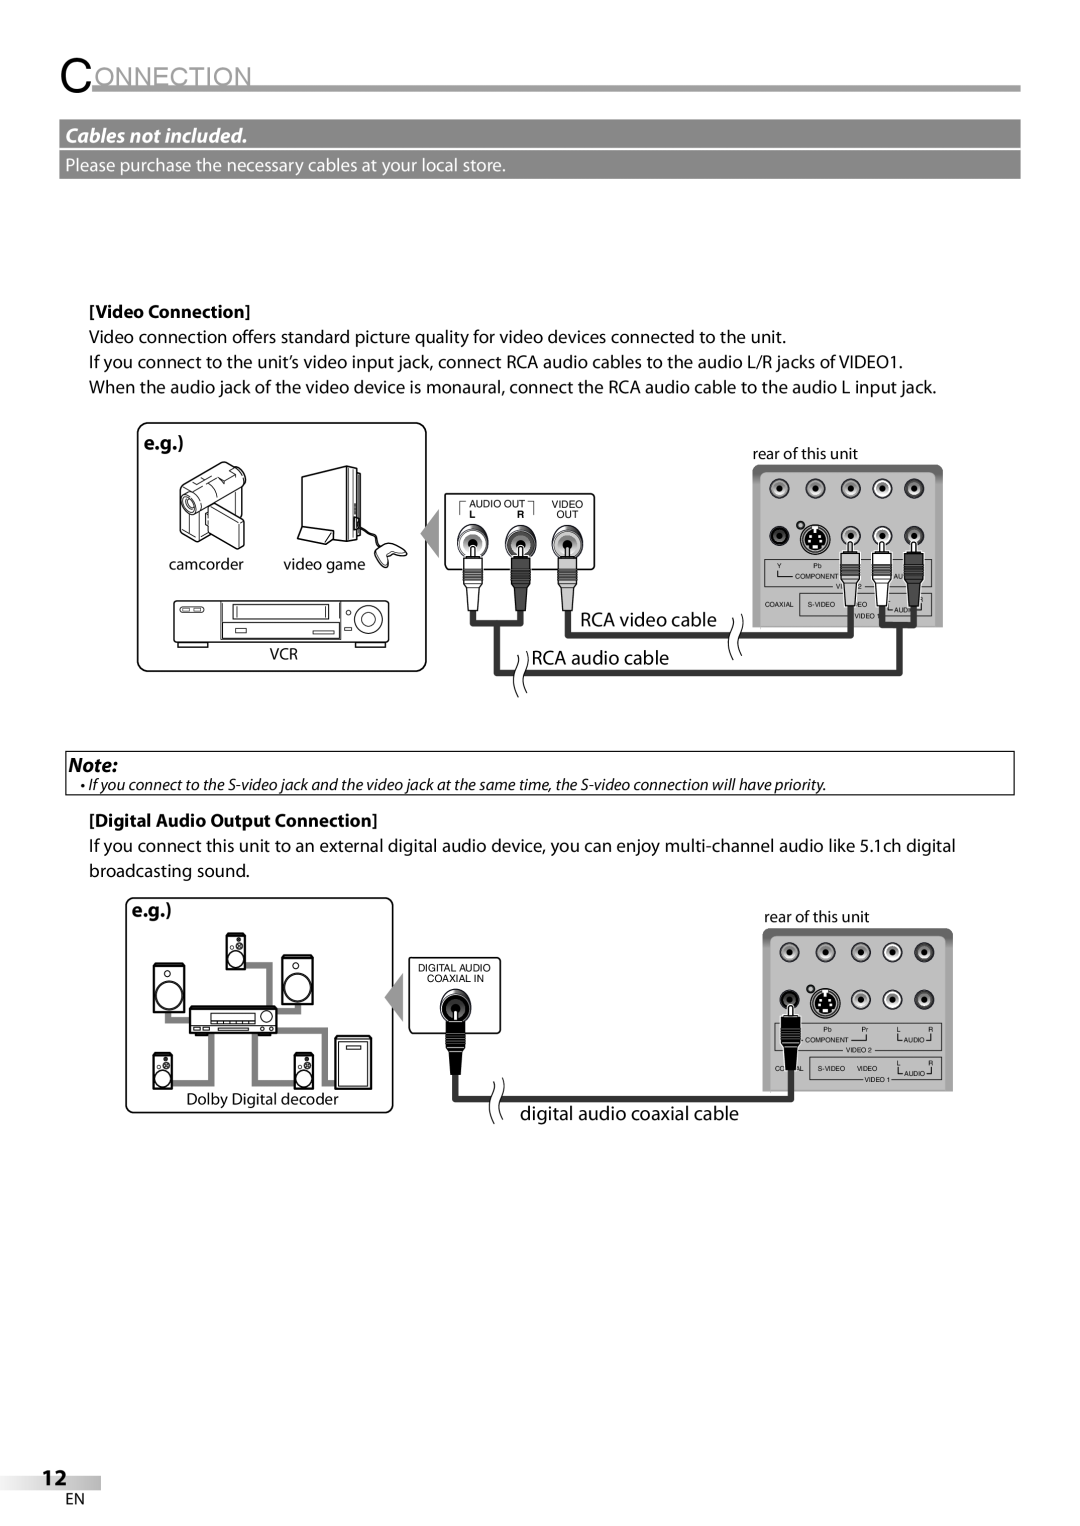 Sylvania LD200SL8 owner manual Cables not included, Video Connection, Digital Audio Output Connection 